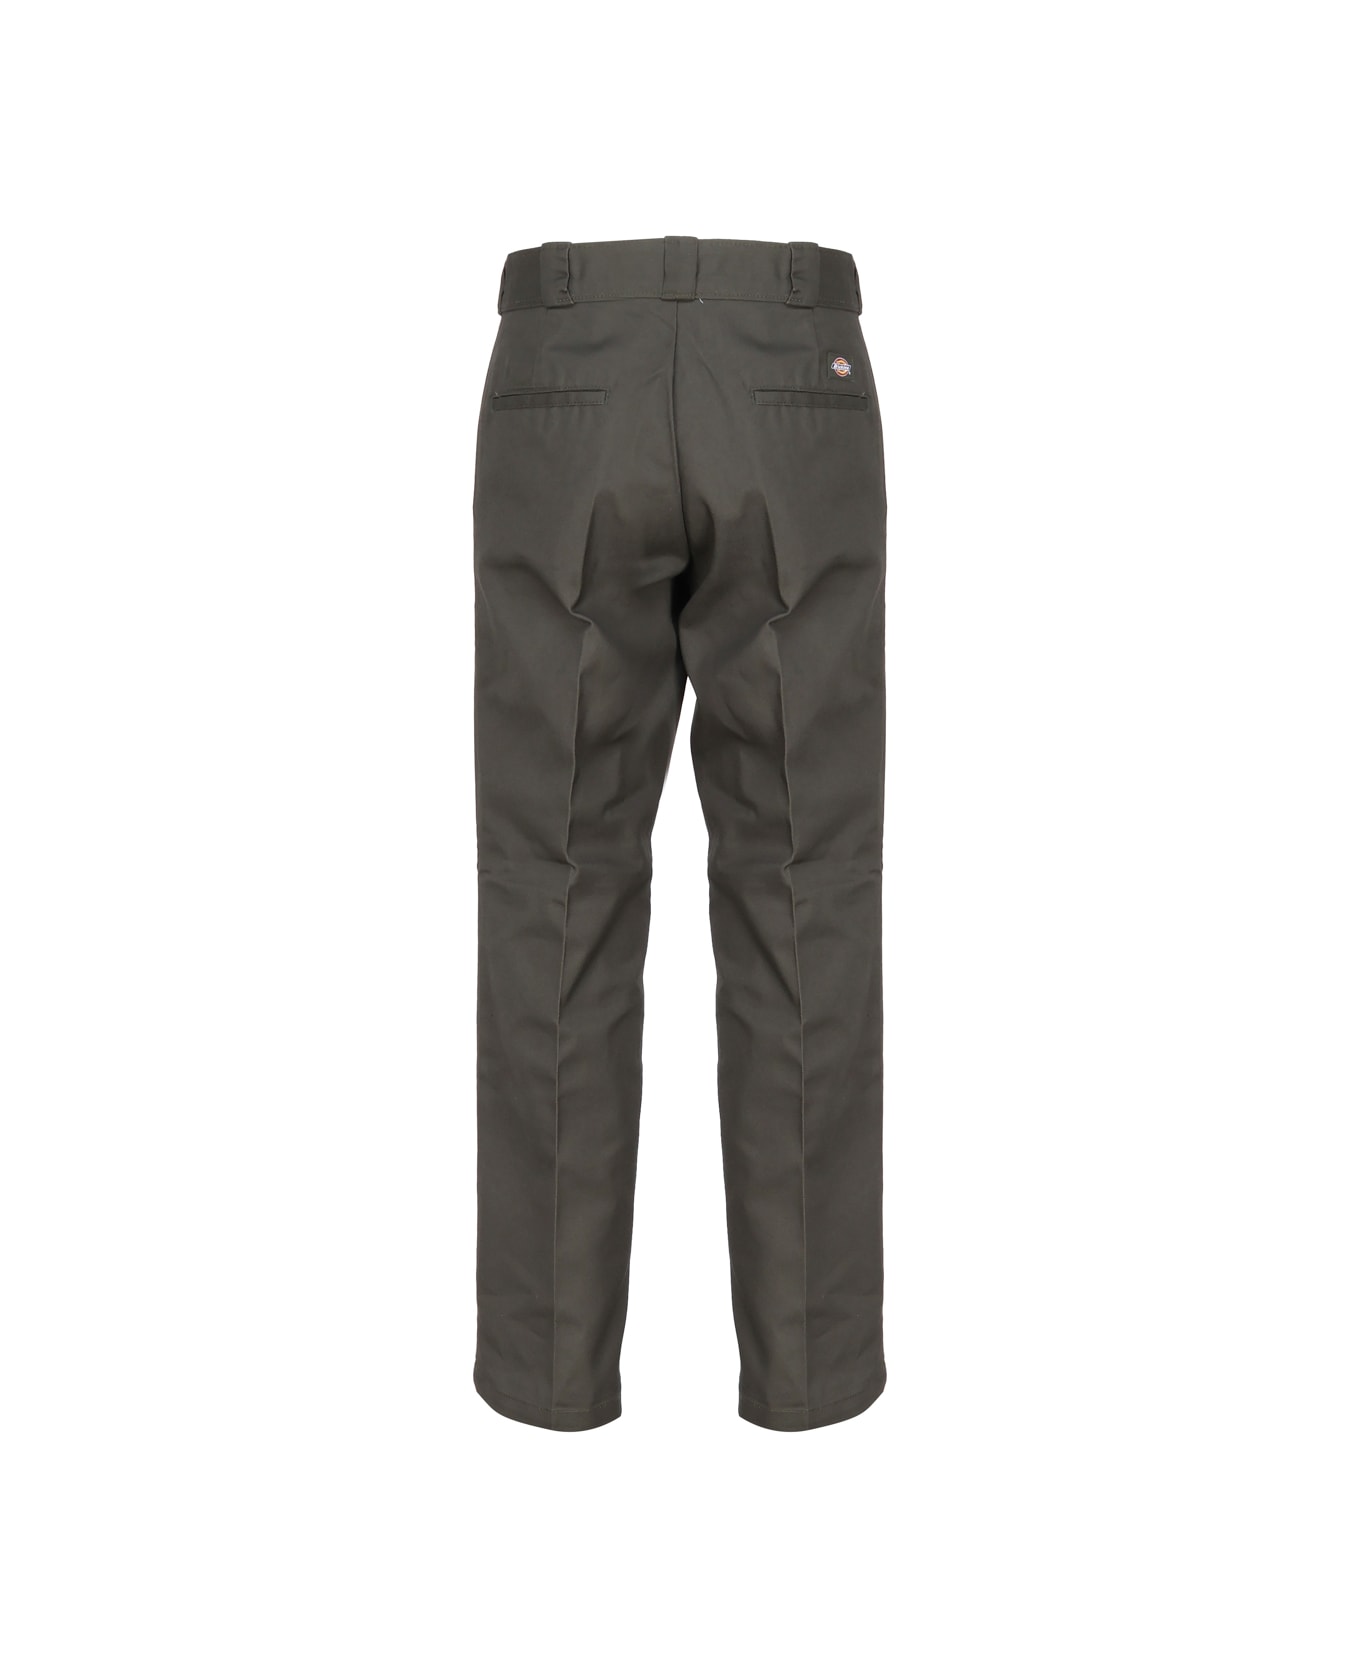 Dickies Chino Trousers - Olive ボトムス